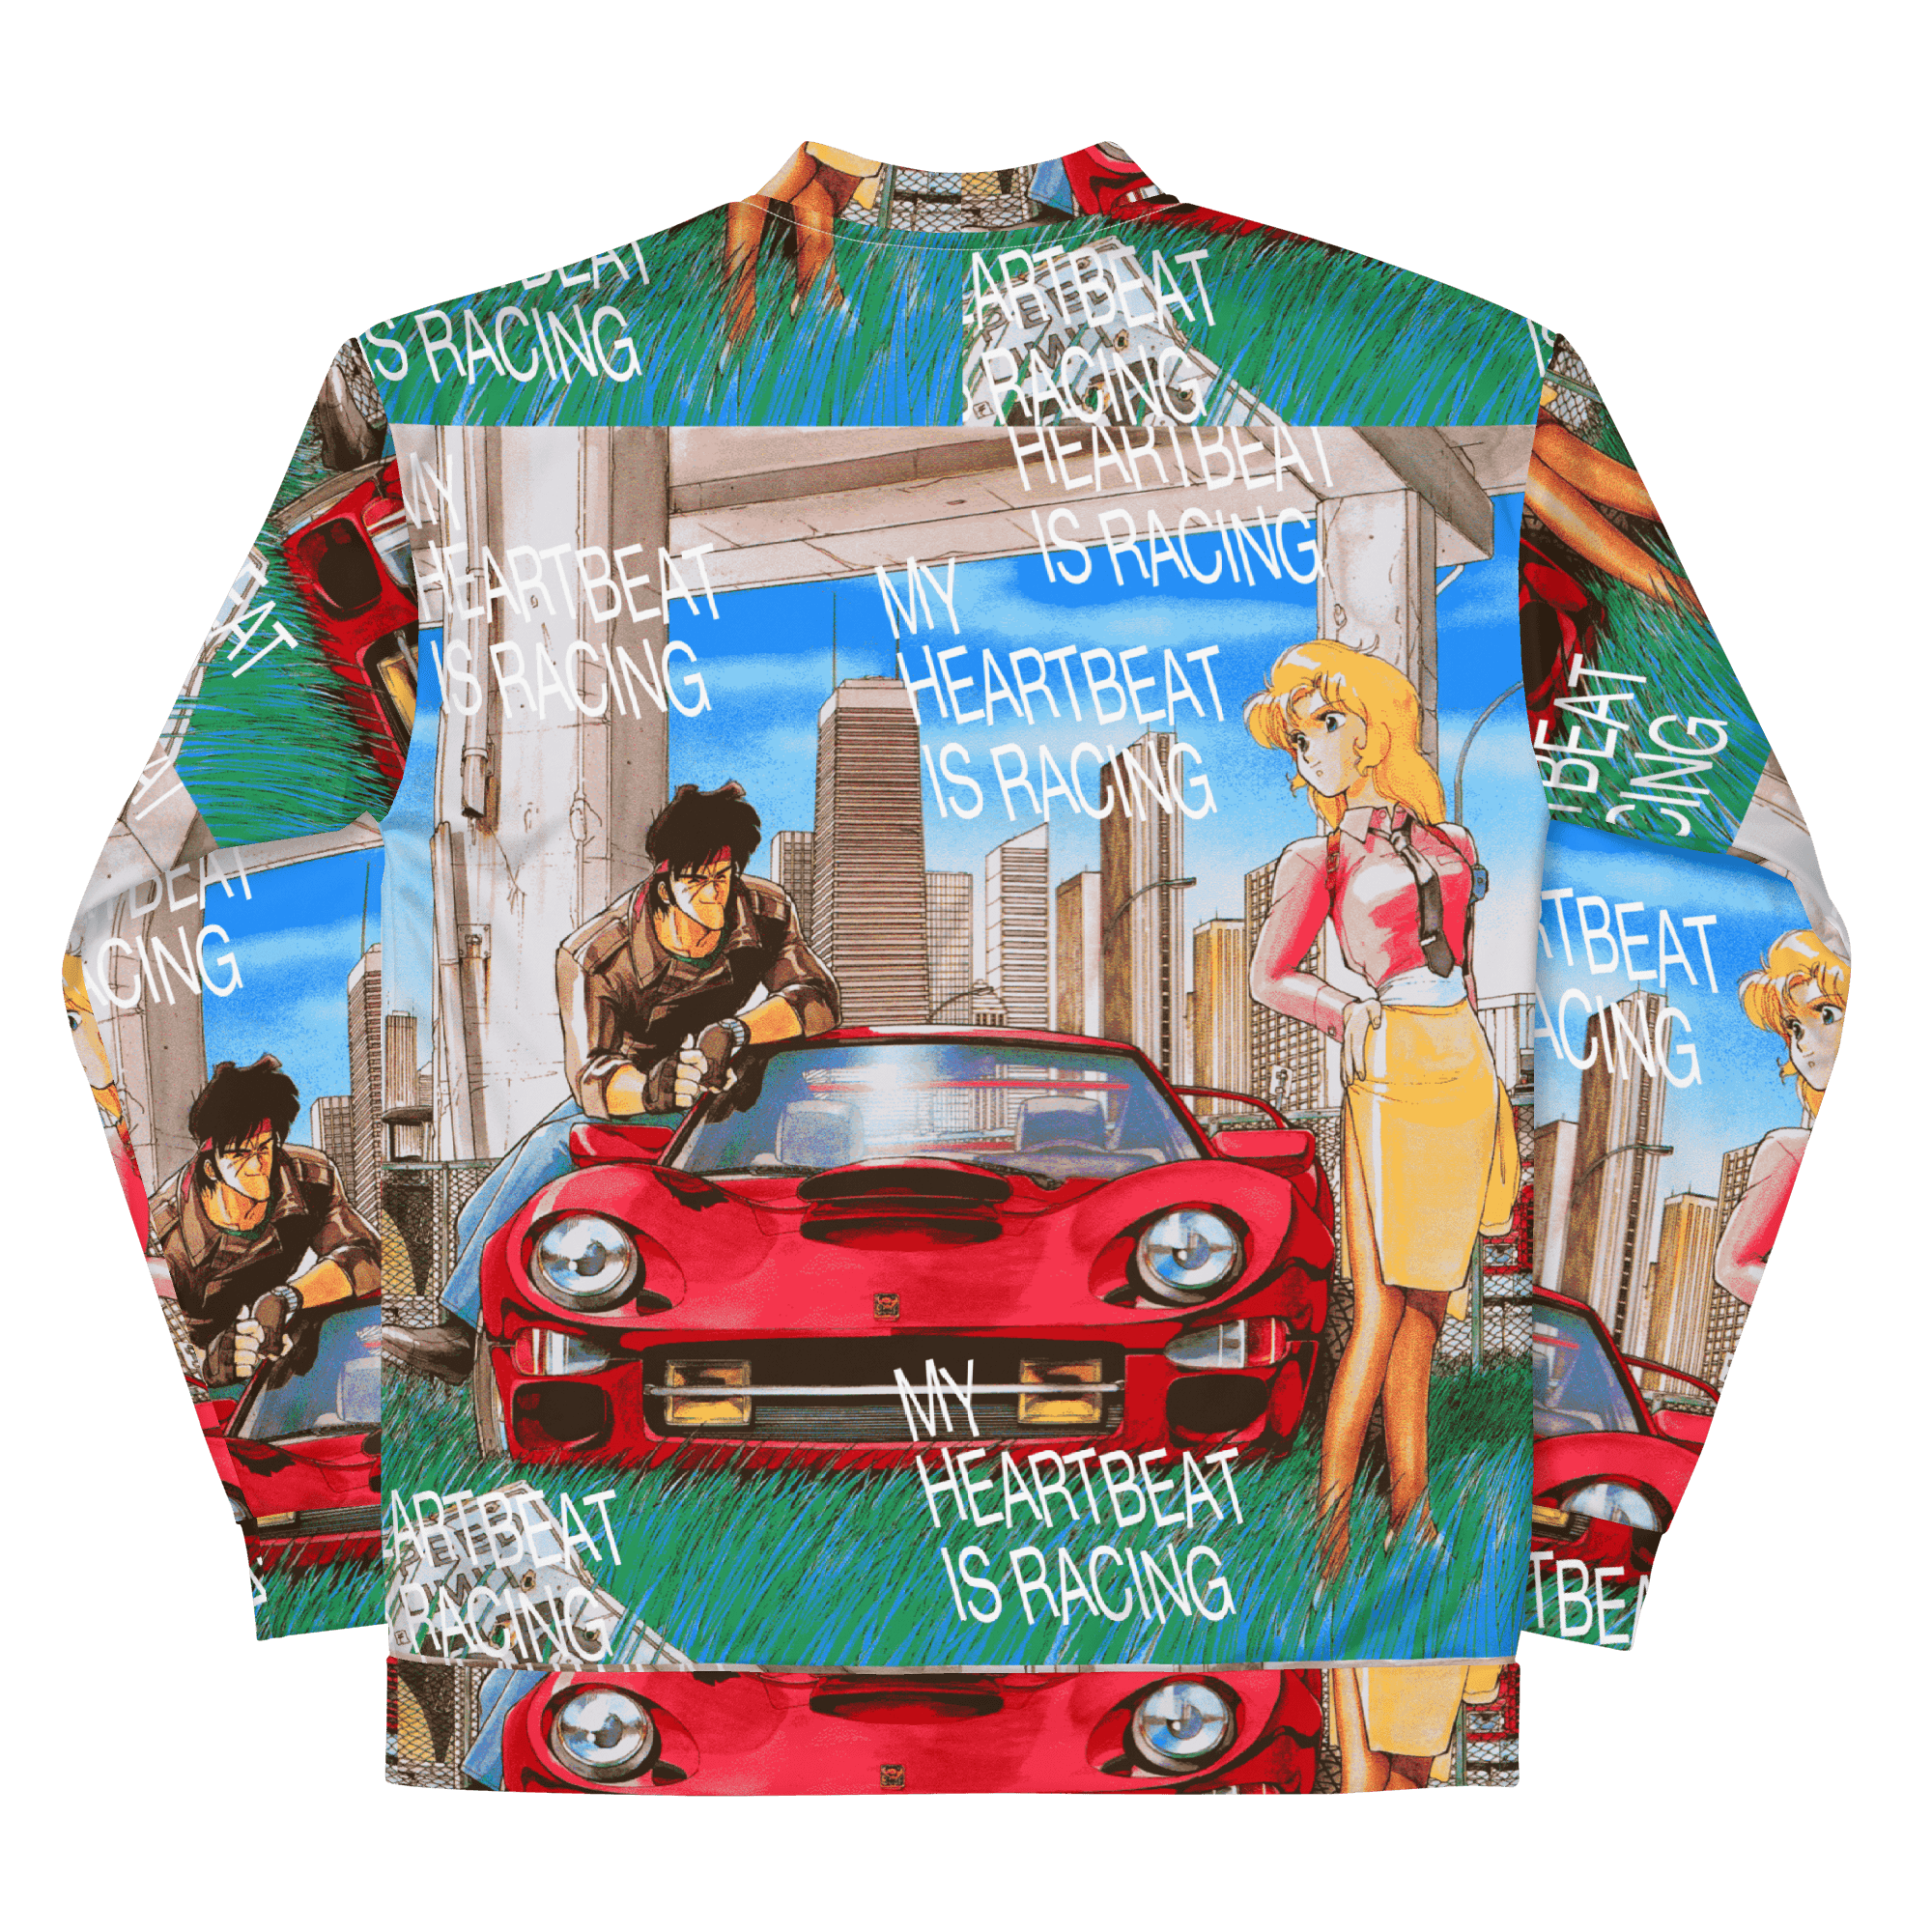 My Heartbeat Is Racing® Bomber Jacket (10 pieces for sale) - Kikillo Club